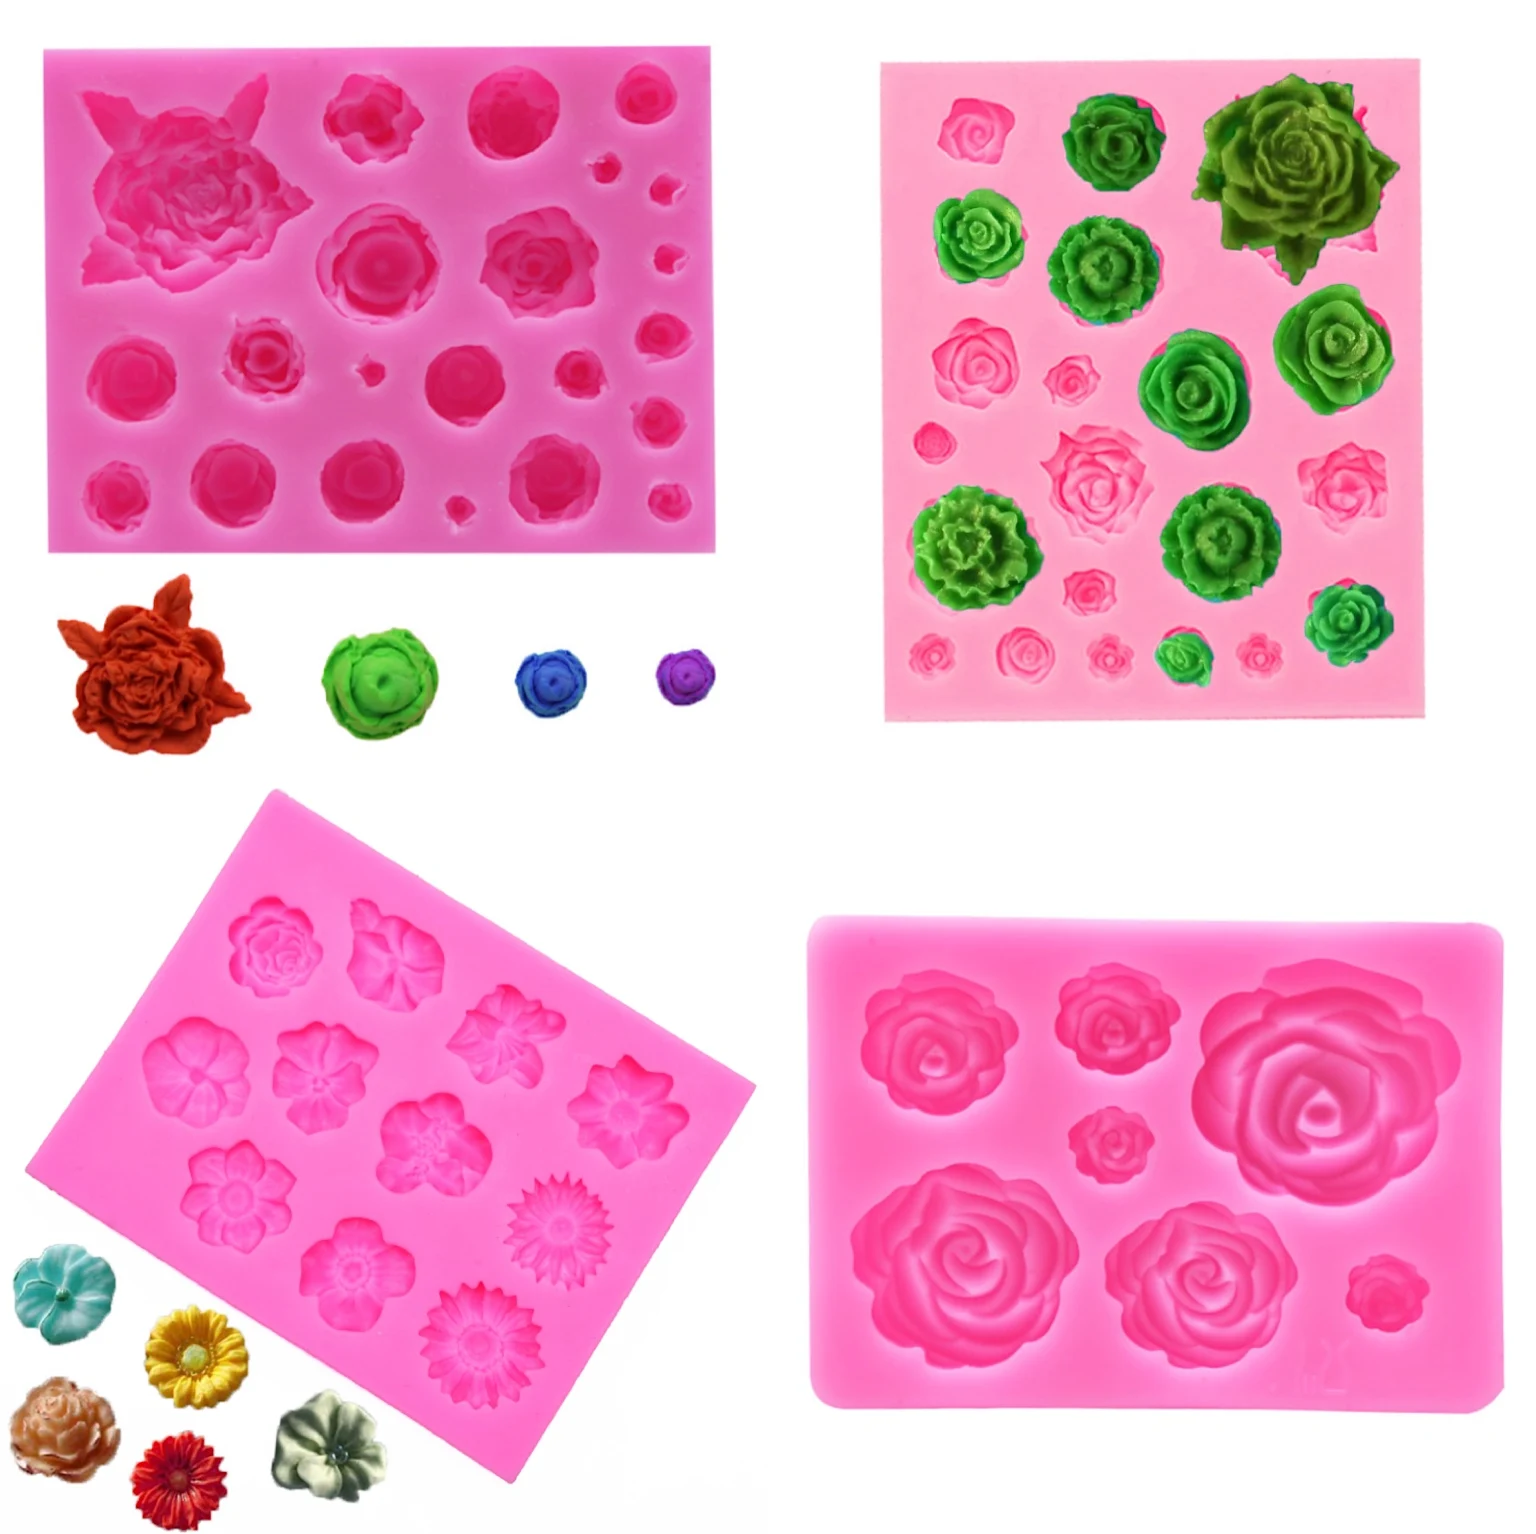 3D Rose Flower Silicone Fondant Mold Cake Decor Chocolate C2P2 SELL Mould S8J6 